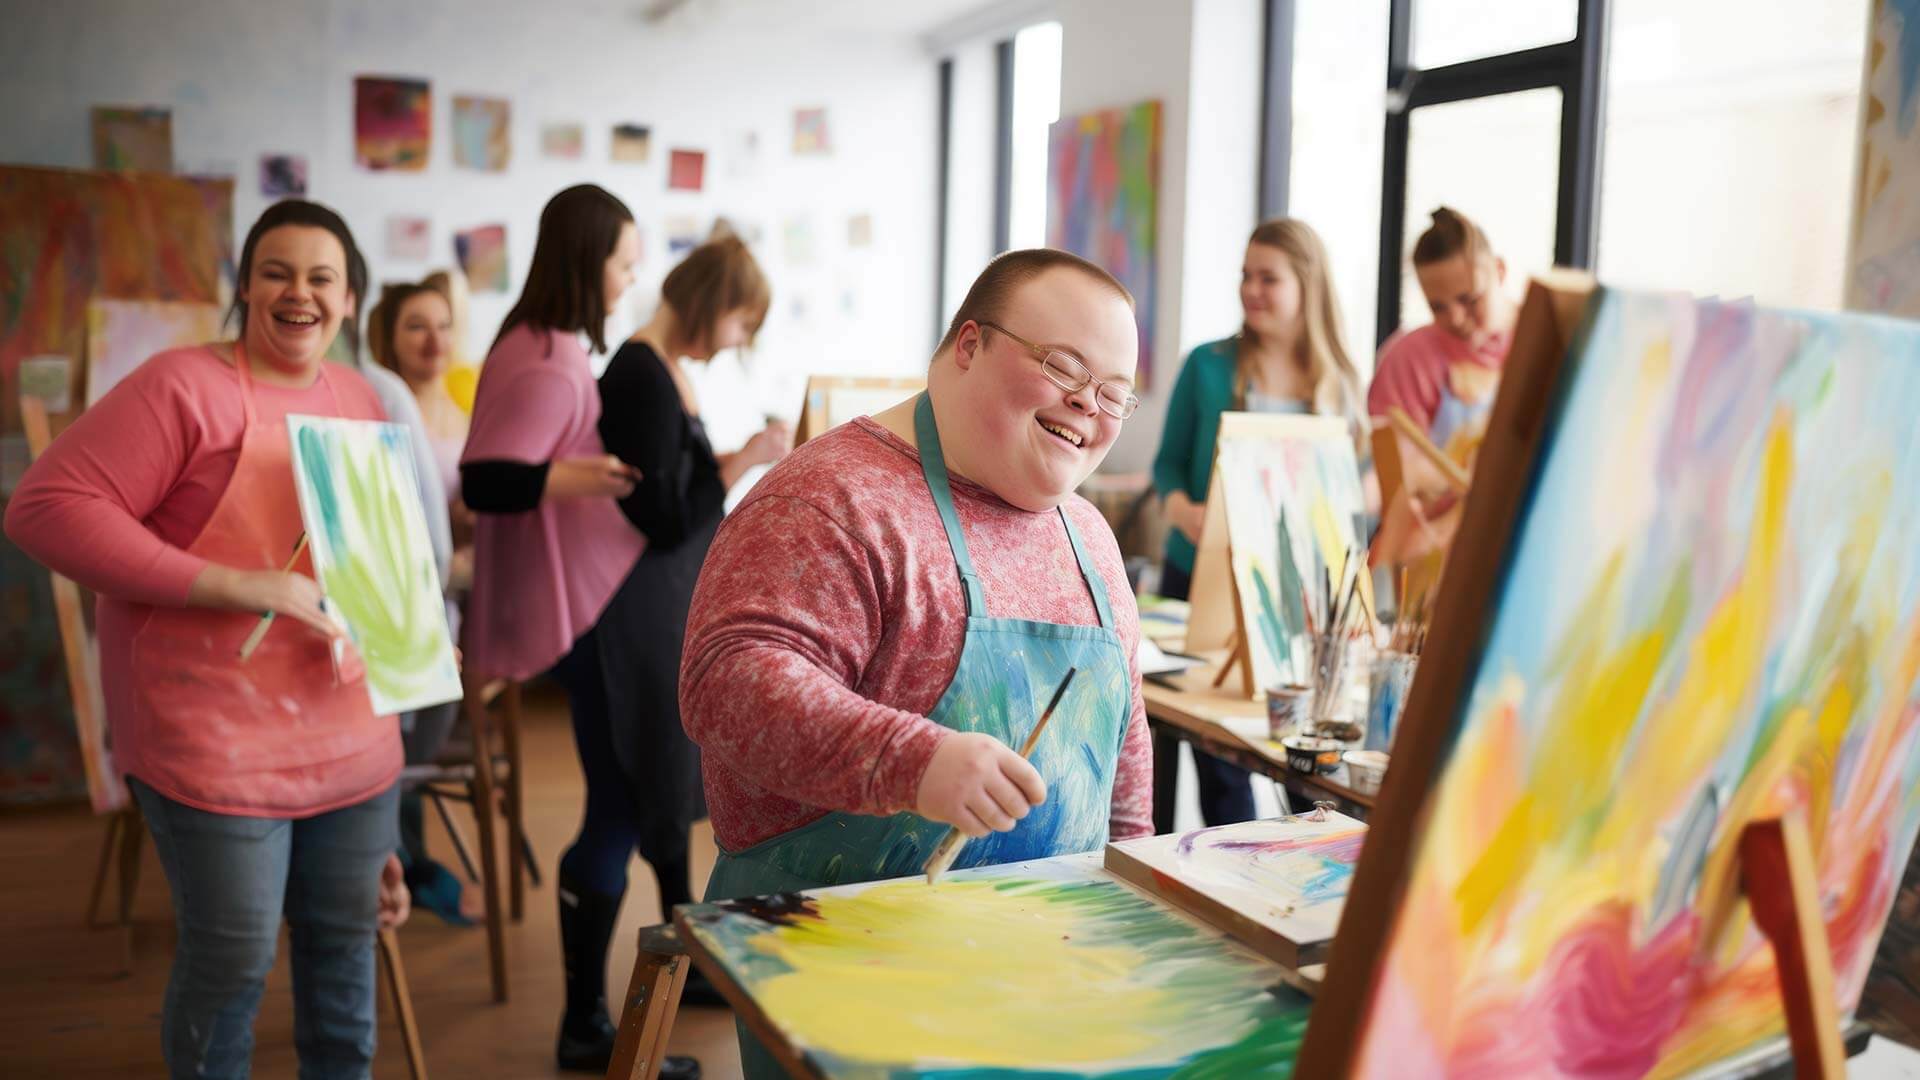 A man with Downs Syndrome smiles as he paints on bright colourful canvas in a class. This picture is used to illustrate the topic of reaching more NDIS participants as a Provider.